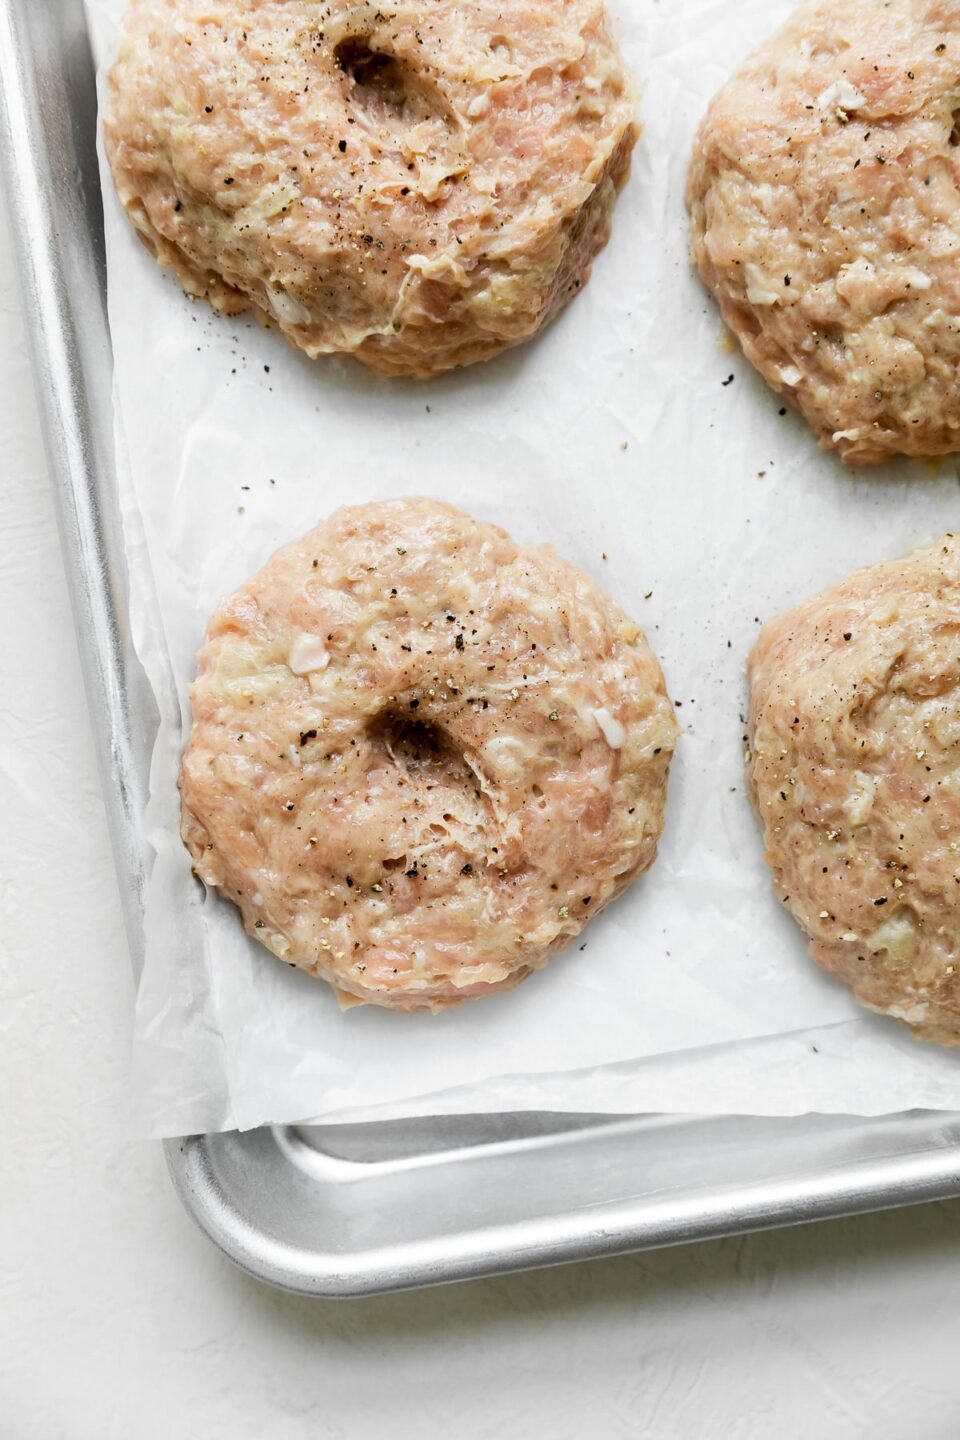 Four raw and uncooked chicken burger patties placed on a small aluminum baking sheet atop crumpled parchment paper. The baking sheet sits atop a creamy white textured surface.